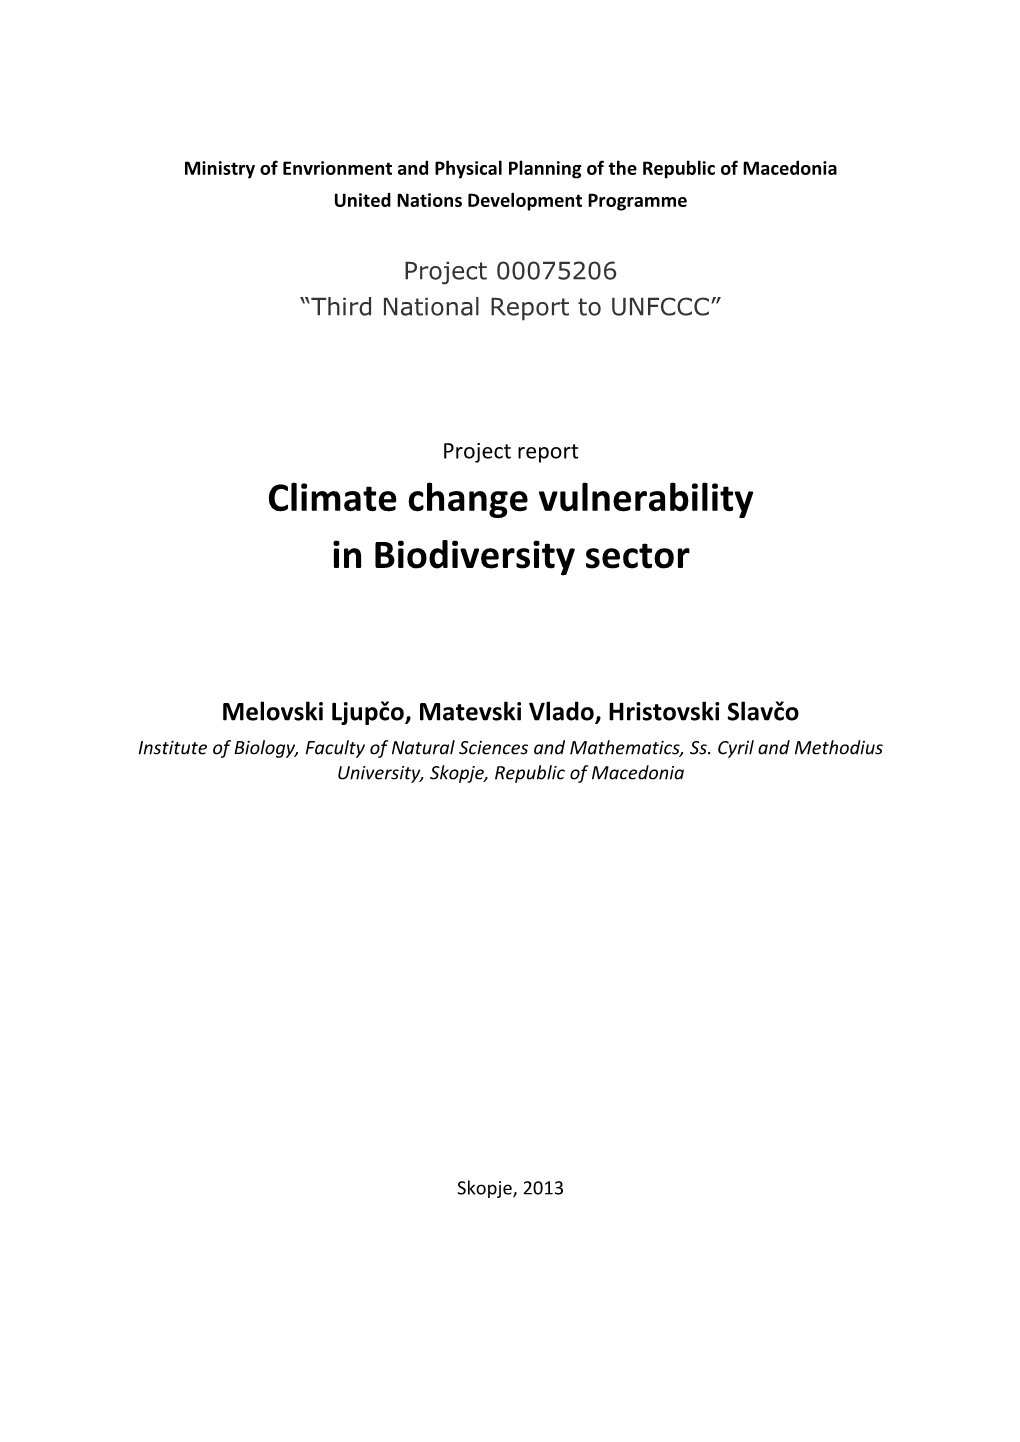 Climate Change Vulnerability in Biodiversity Sector